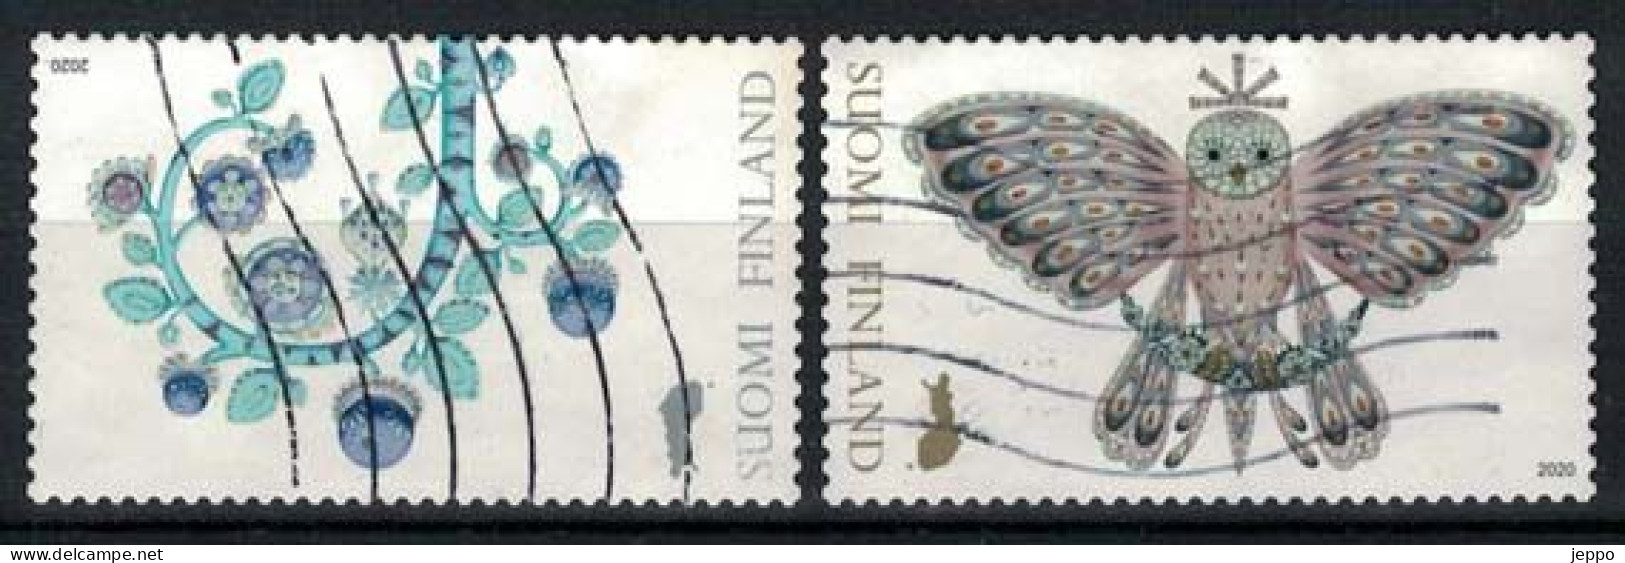 2020 Finland, Enchanted Forest, Complete Used Set. - Used Stamps